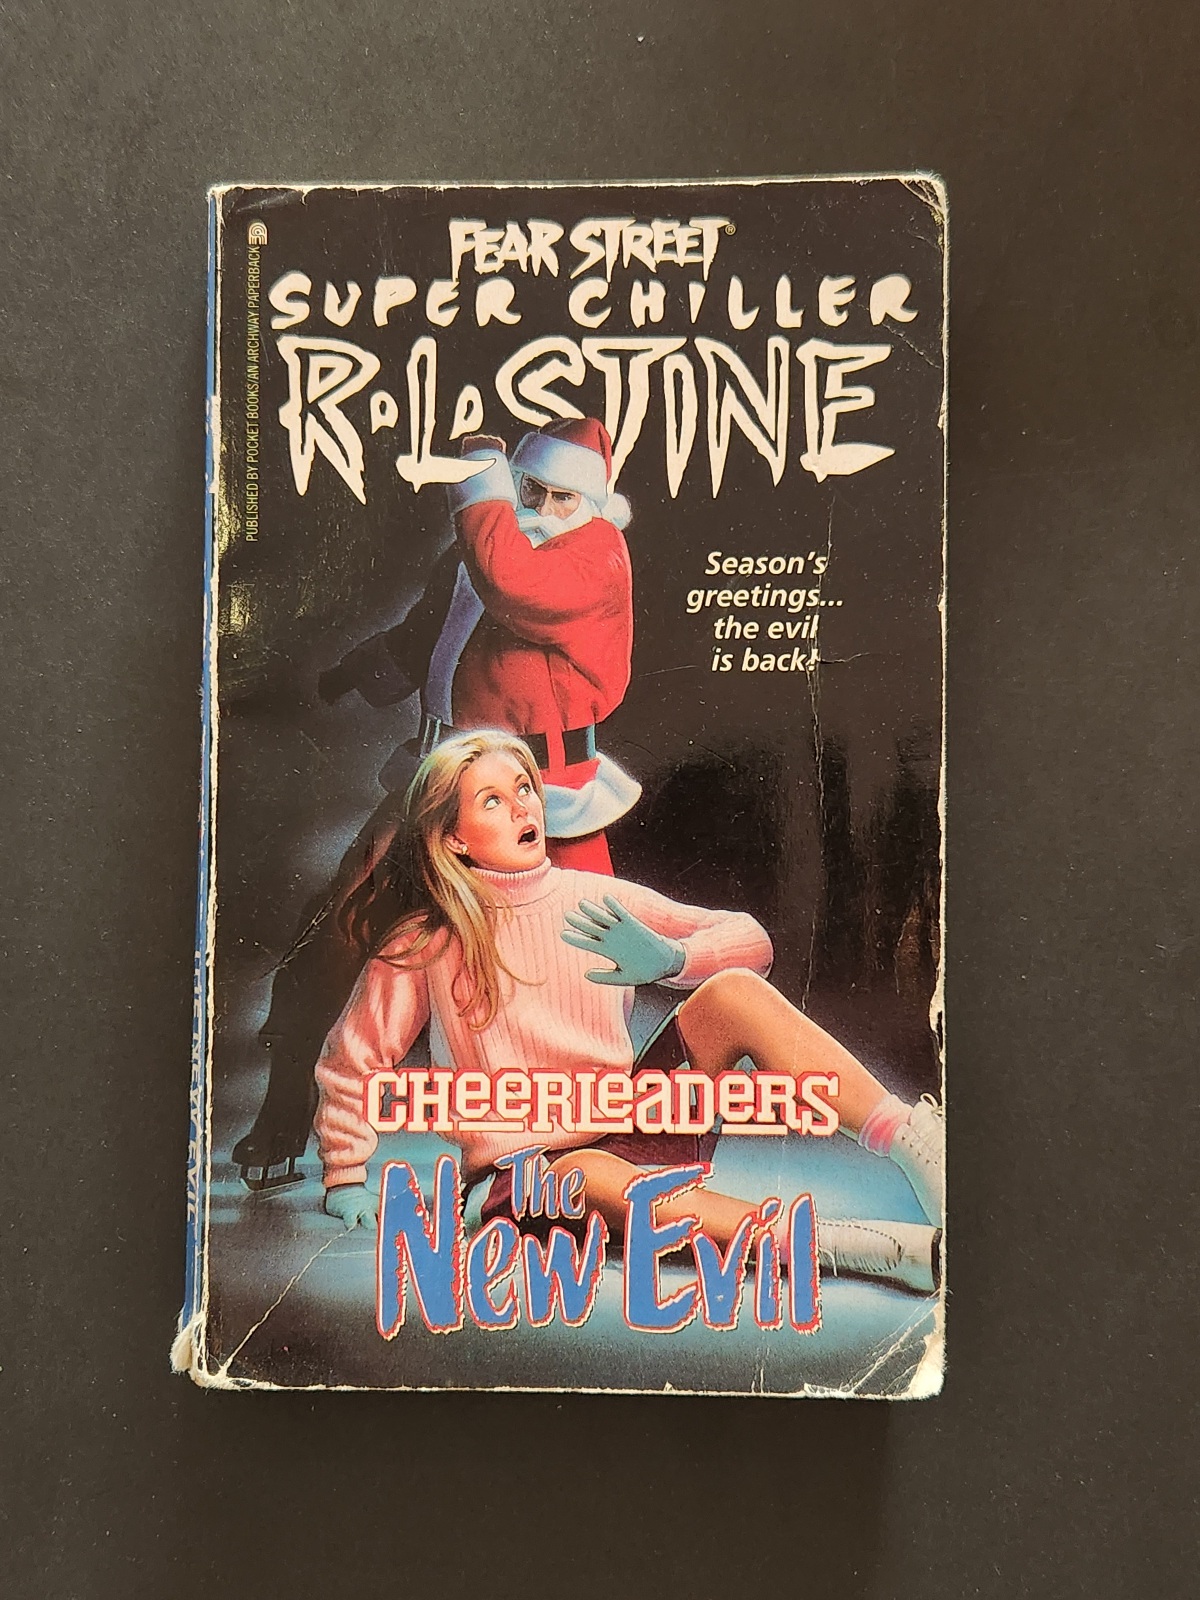 Cheerleaders The New Evil by R.L. Stine Fear Street Super Chiller 1994 1st printing